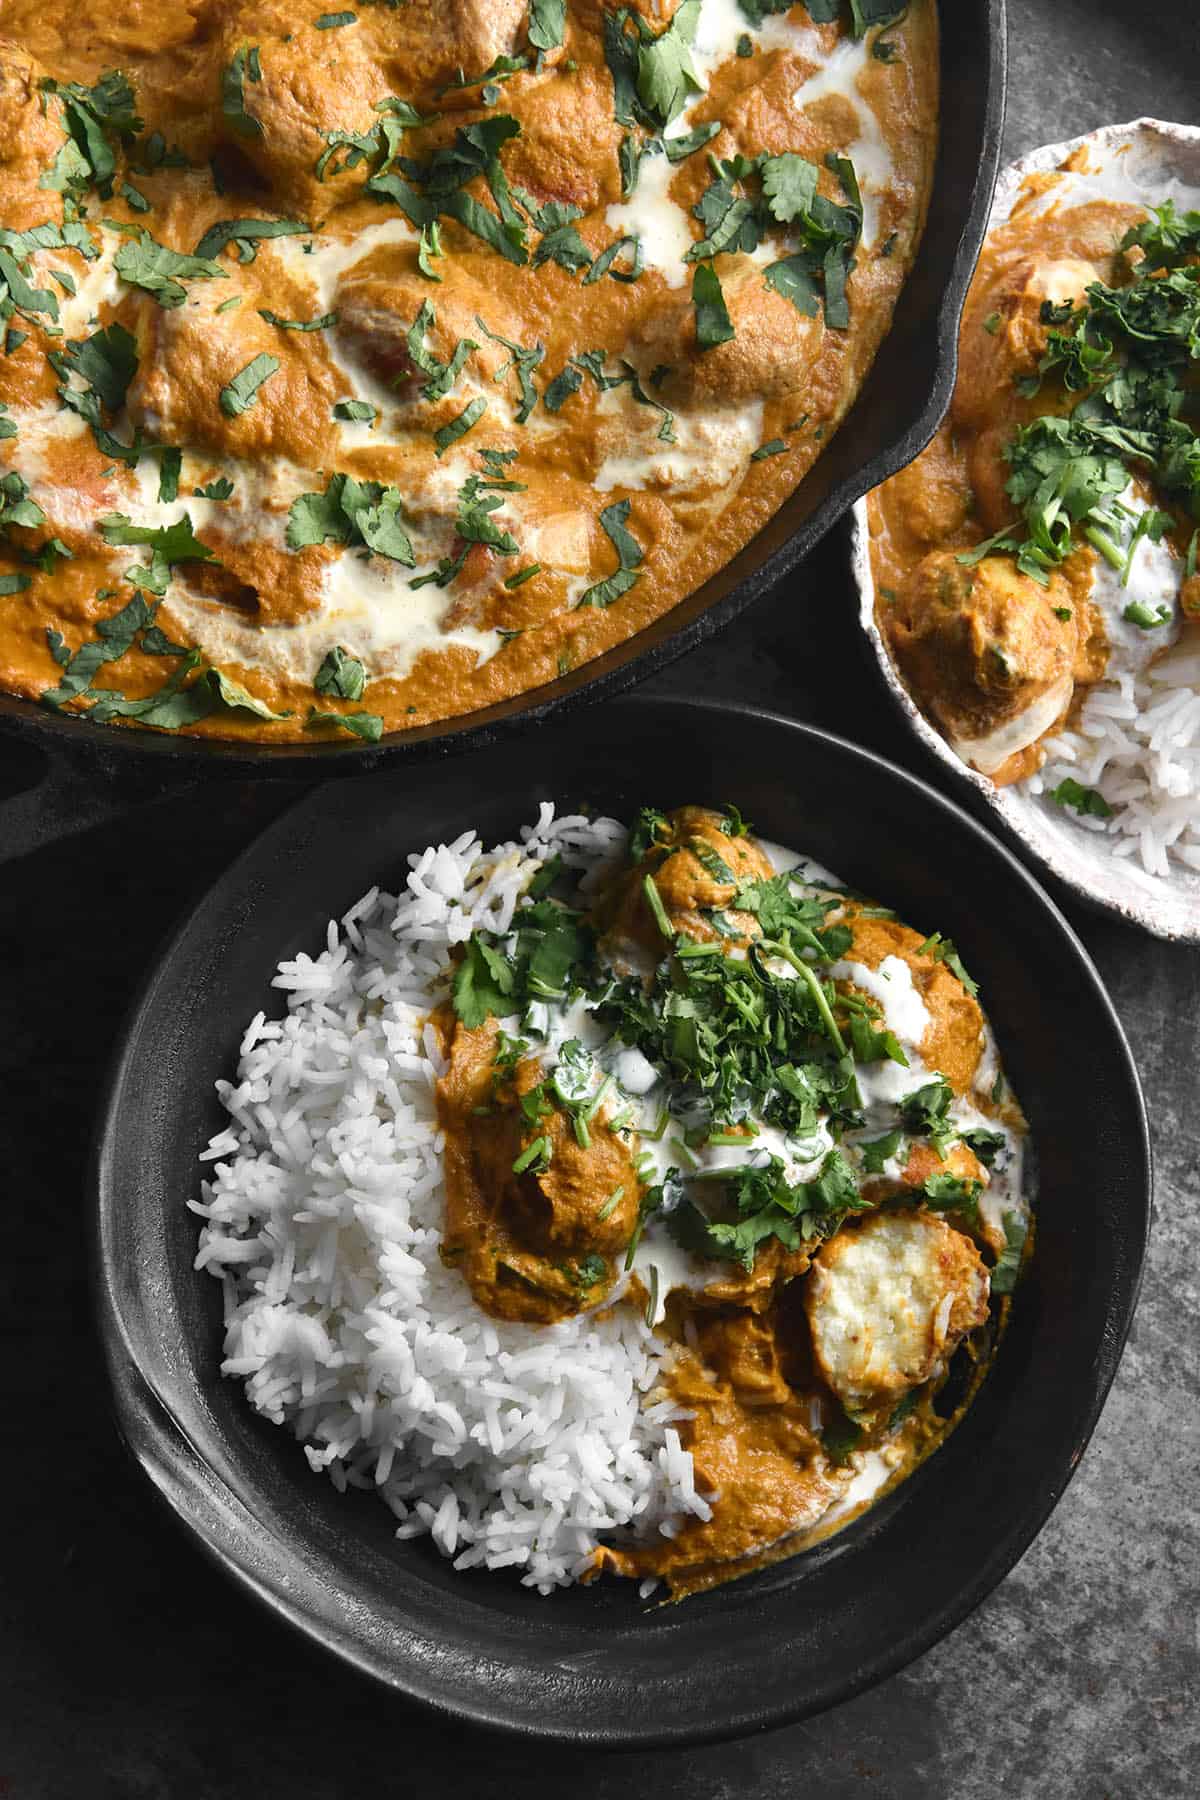 An aerial view of two bowls and a skillet filled with FODMAP friendly Malai Kofta. The skillet kofta is topped with a swirl of cream and coriander. The bowls are filled with white rice accompanying the kofta. The scene is set on a dark grey steel backdrop.